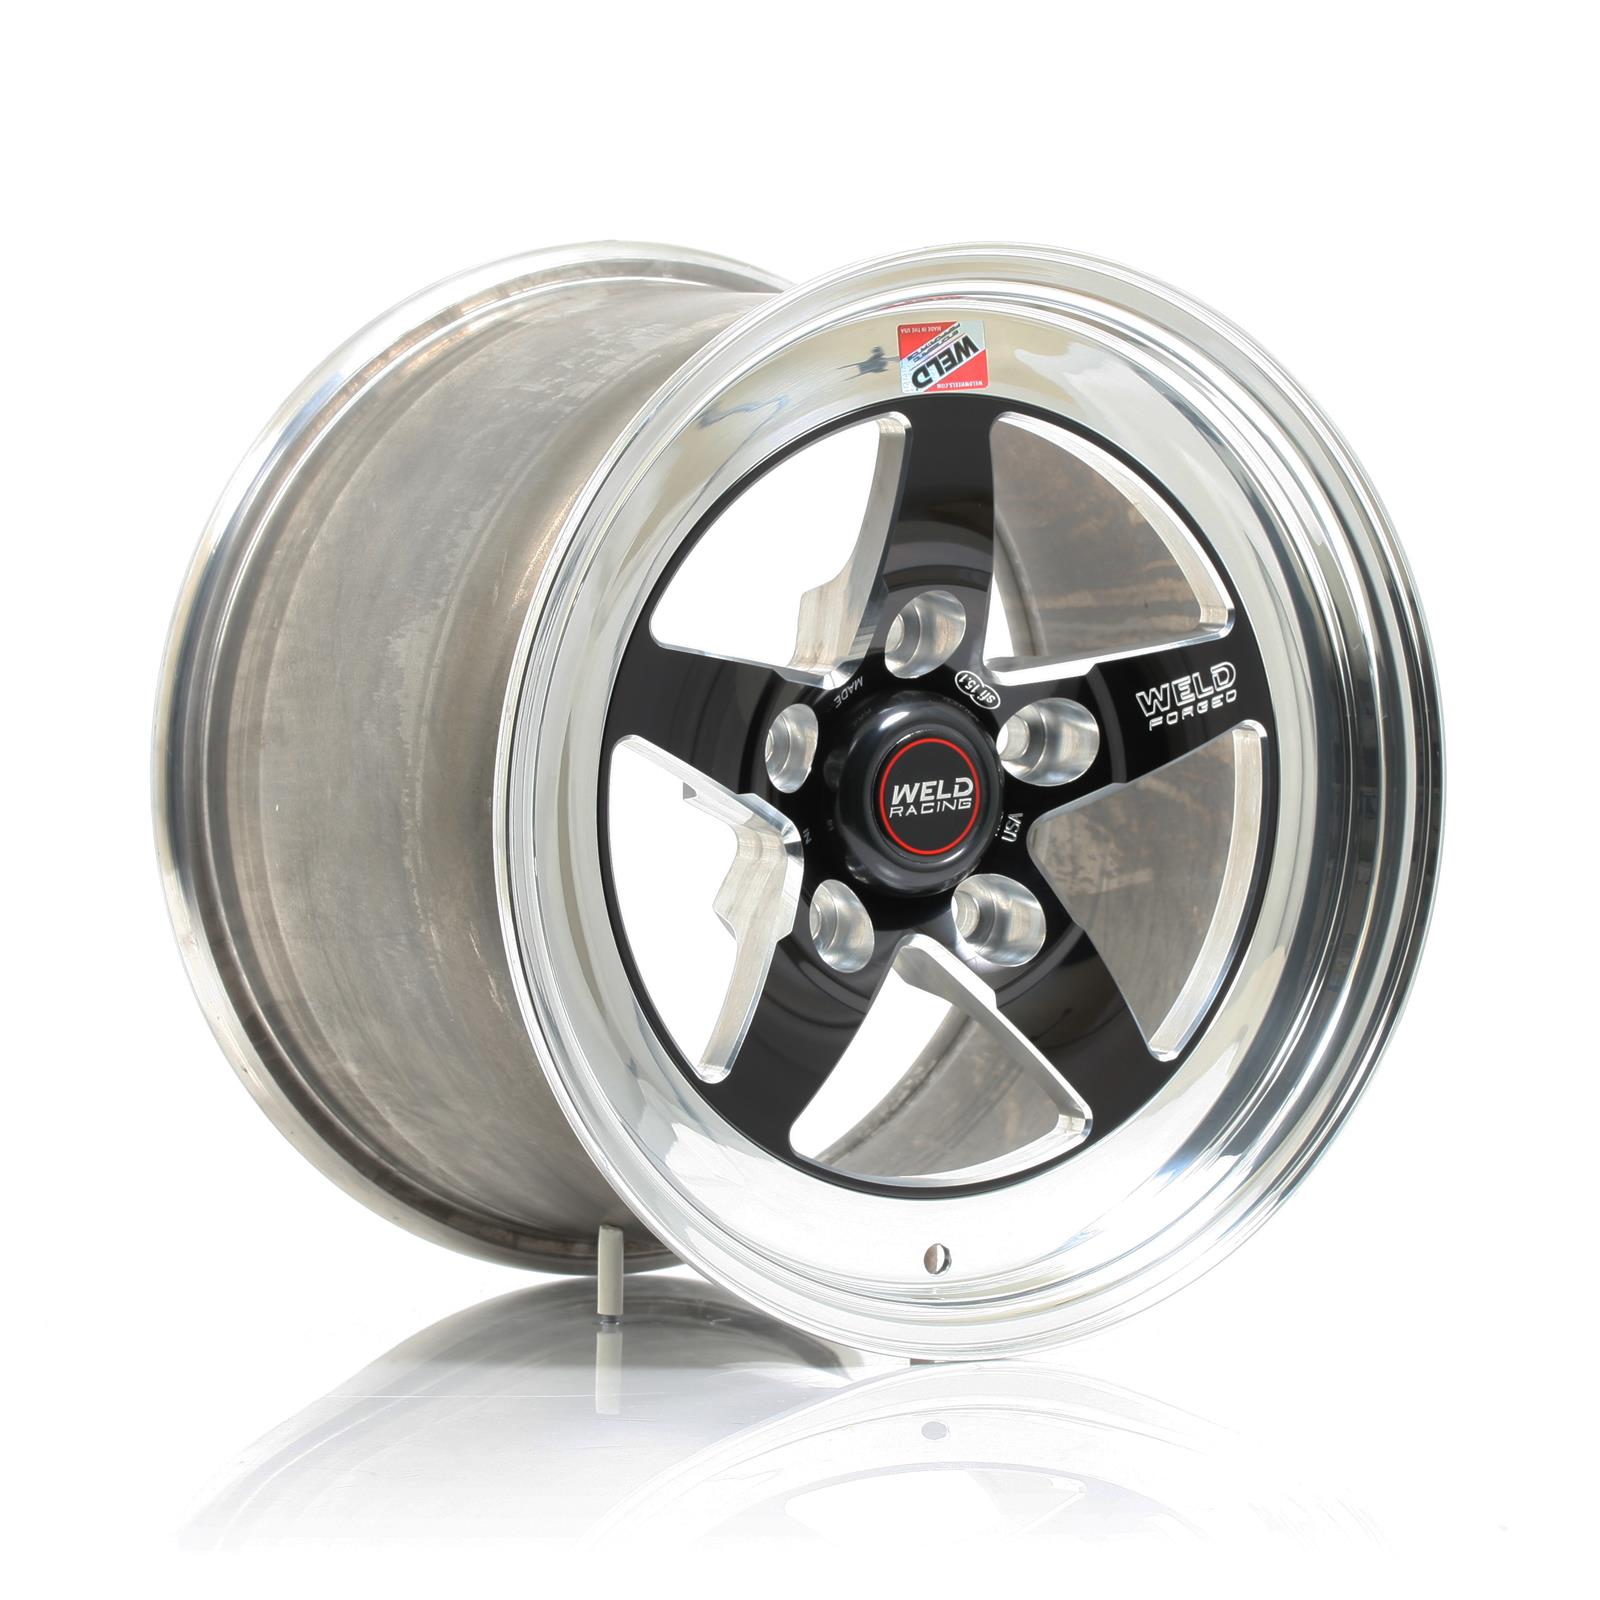 Weld Racing RT-S S71 Forged Aluminum Black Anodized Wheels - 18x10.5" w/7.7" Back Spacing